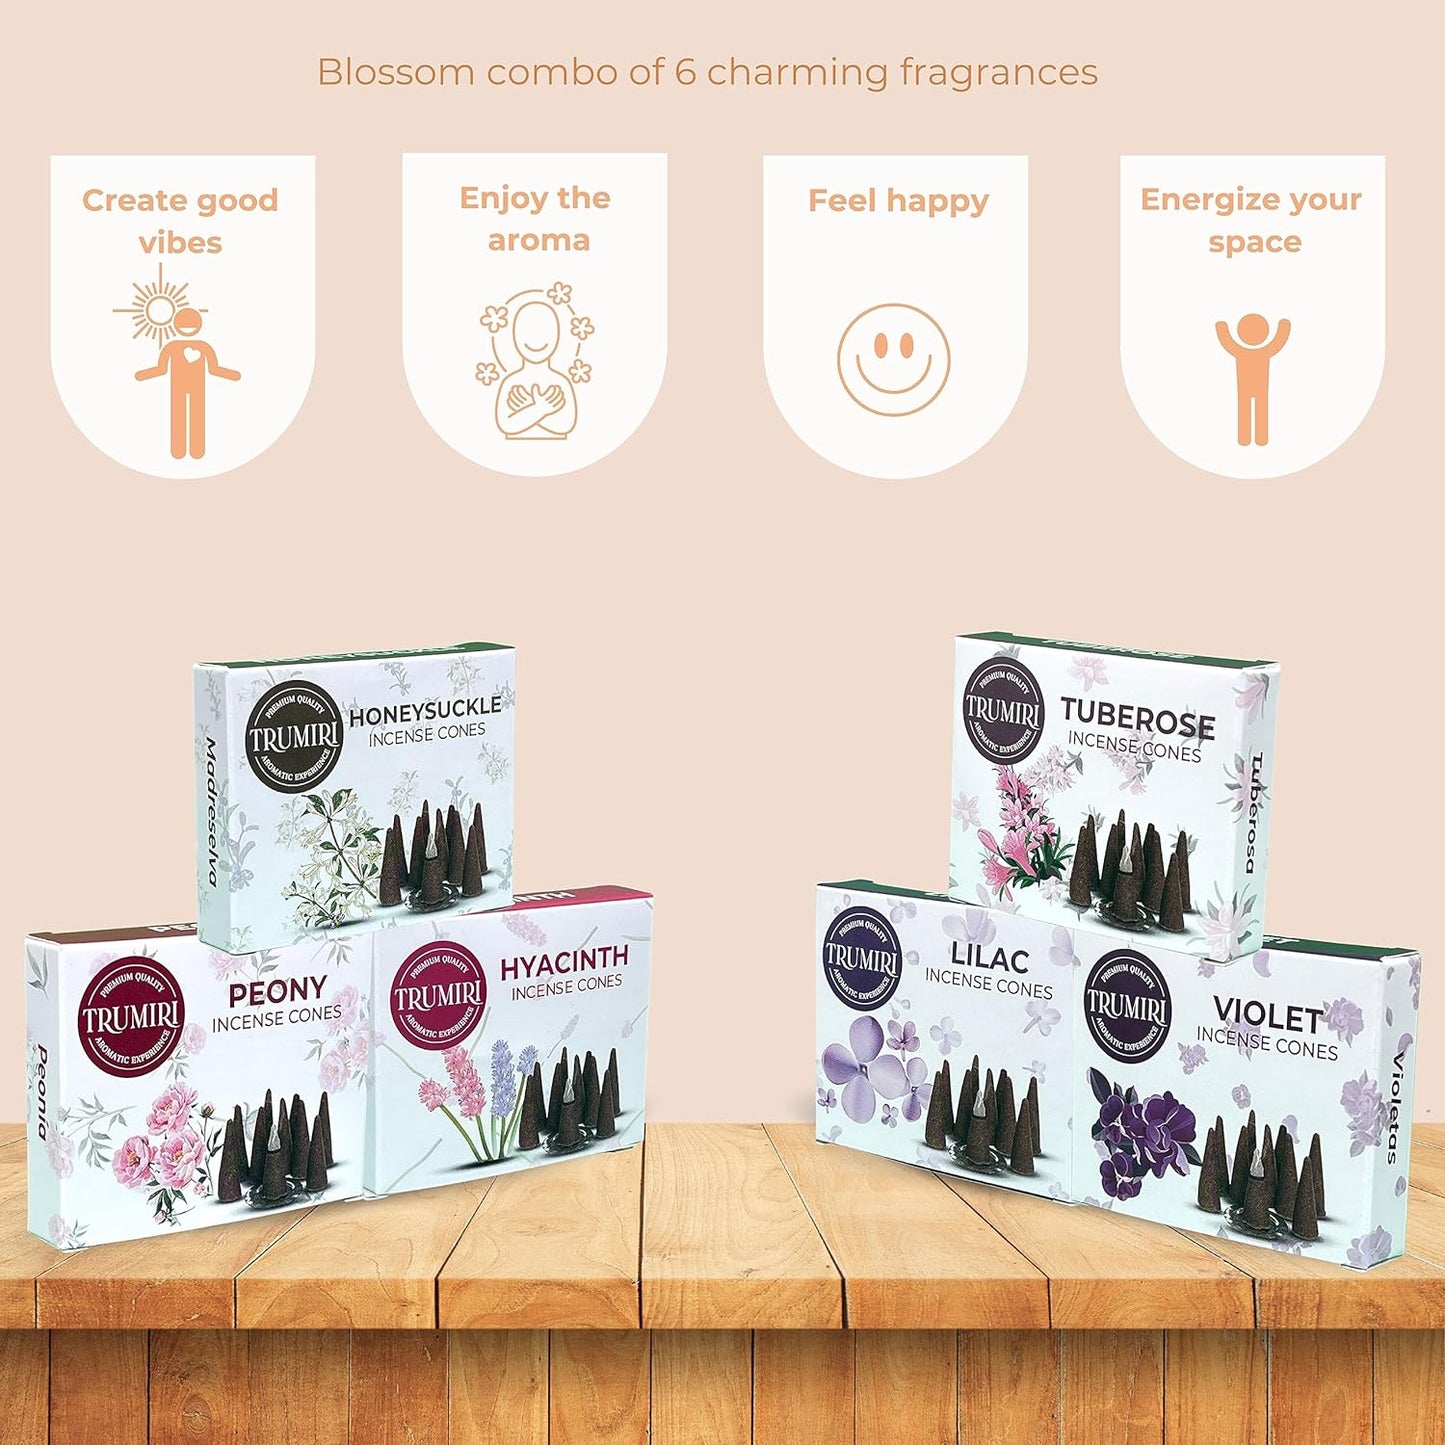 Trumiri Blossom Scents Incense Cones Variety Pack of 6 Scents with 10 Cones per Scent - Total 60 Cones